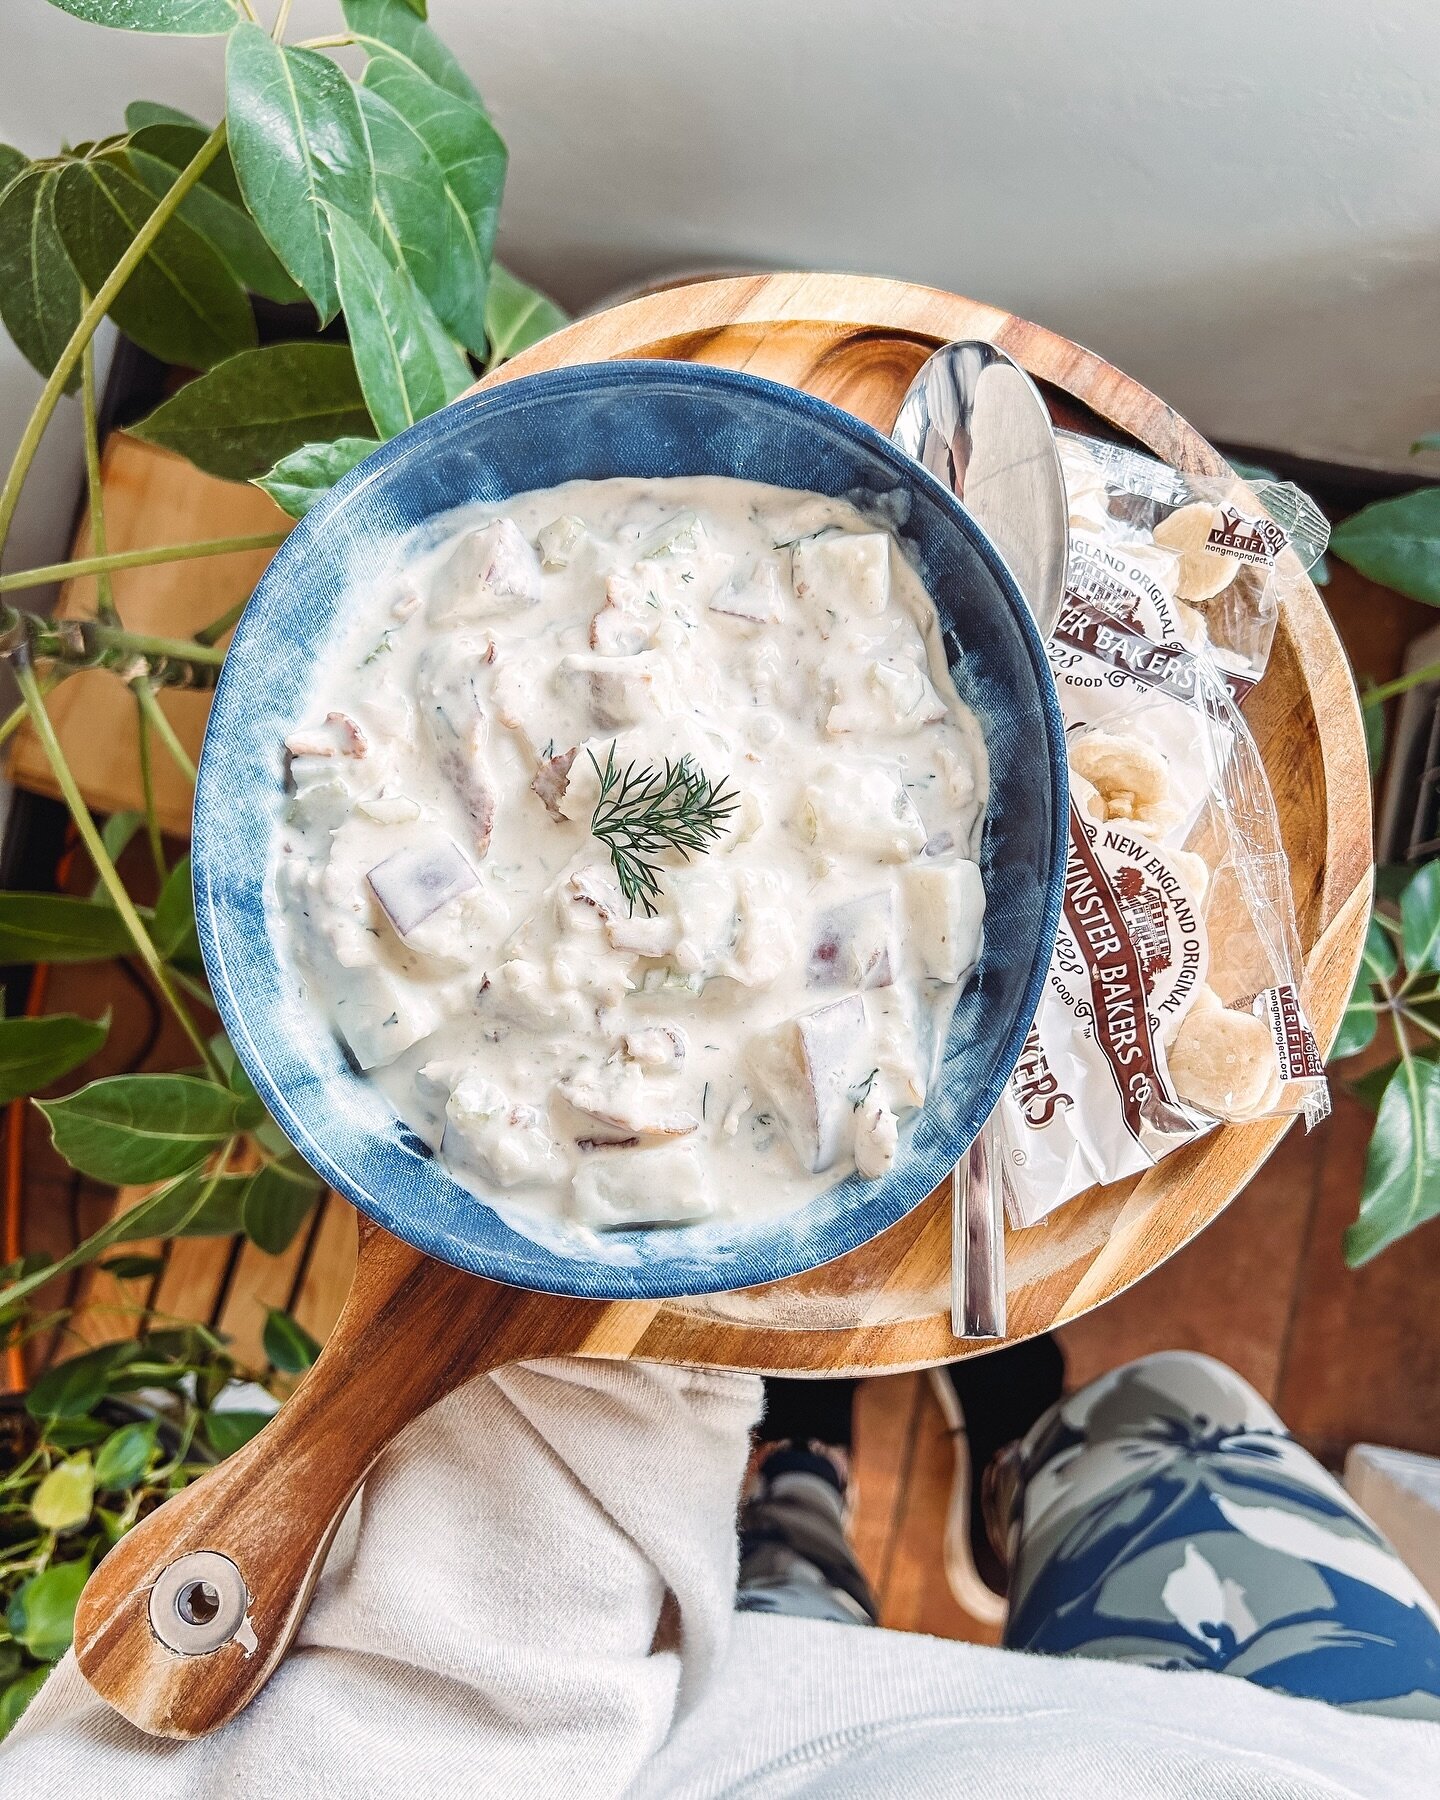 ✨NEW✨ Smoked Haddock Chowder 🐟 incredibly flavorful, creamy and bright. A must try. Available in our grab &amp; go!⁣
⁣
⁣
⁣
⁣
⁣
⁣
#jrseafoodmarket #smokedhaddock #chowder #fishchowder #fishsoup #mysticeats #seafoodie